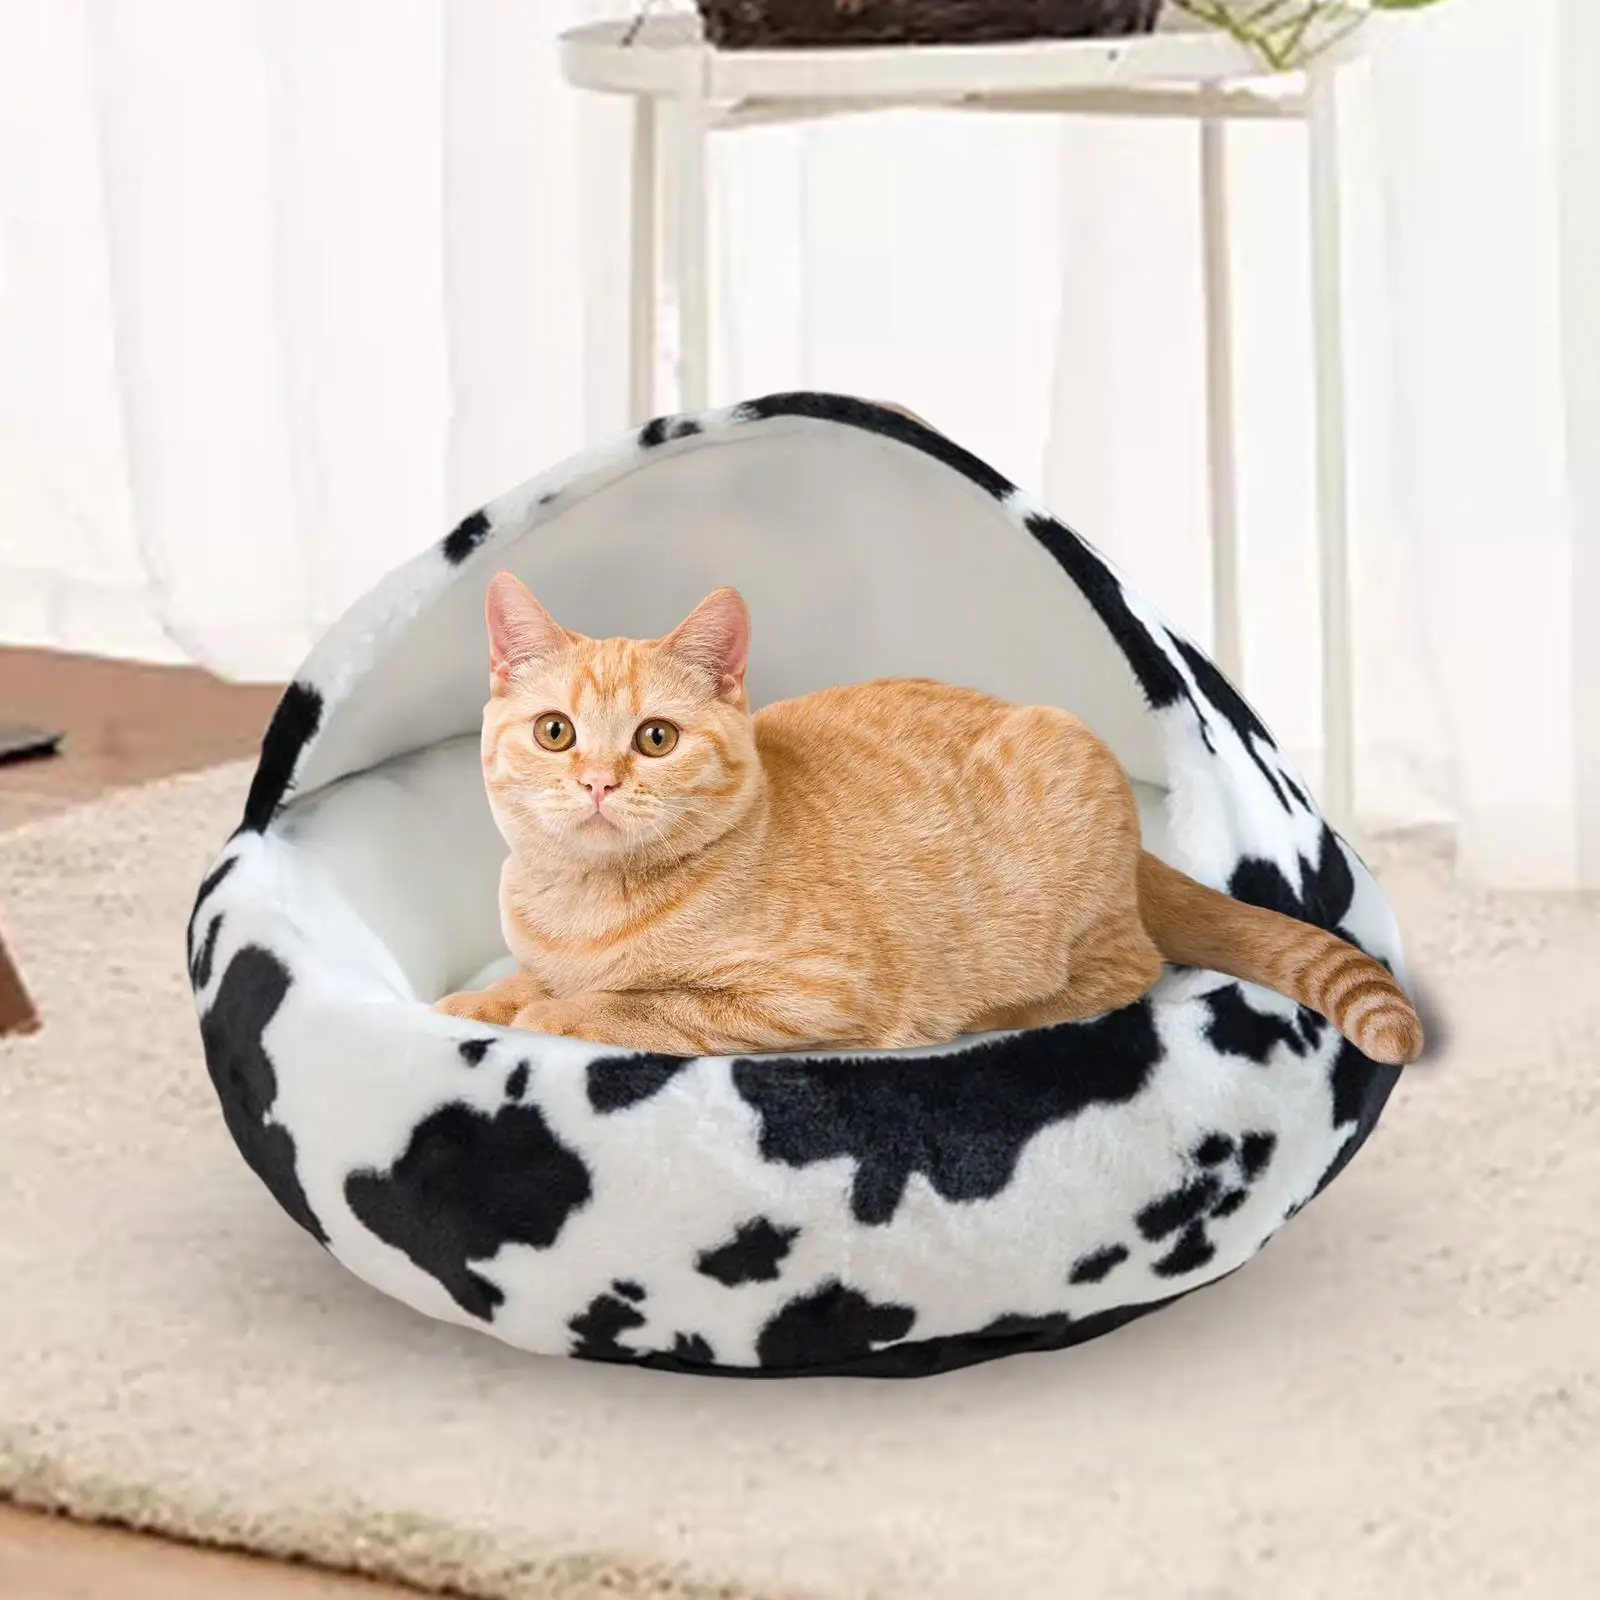 Warm Pet House Dog Tent Nonslip Bottom Self Warming Soft Cushion Nest Cave Cat Bed for Kitty Small Medium Dog Indoor Cats Puppy